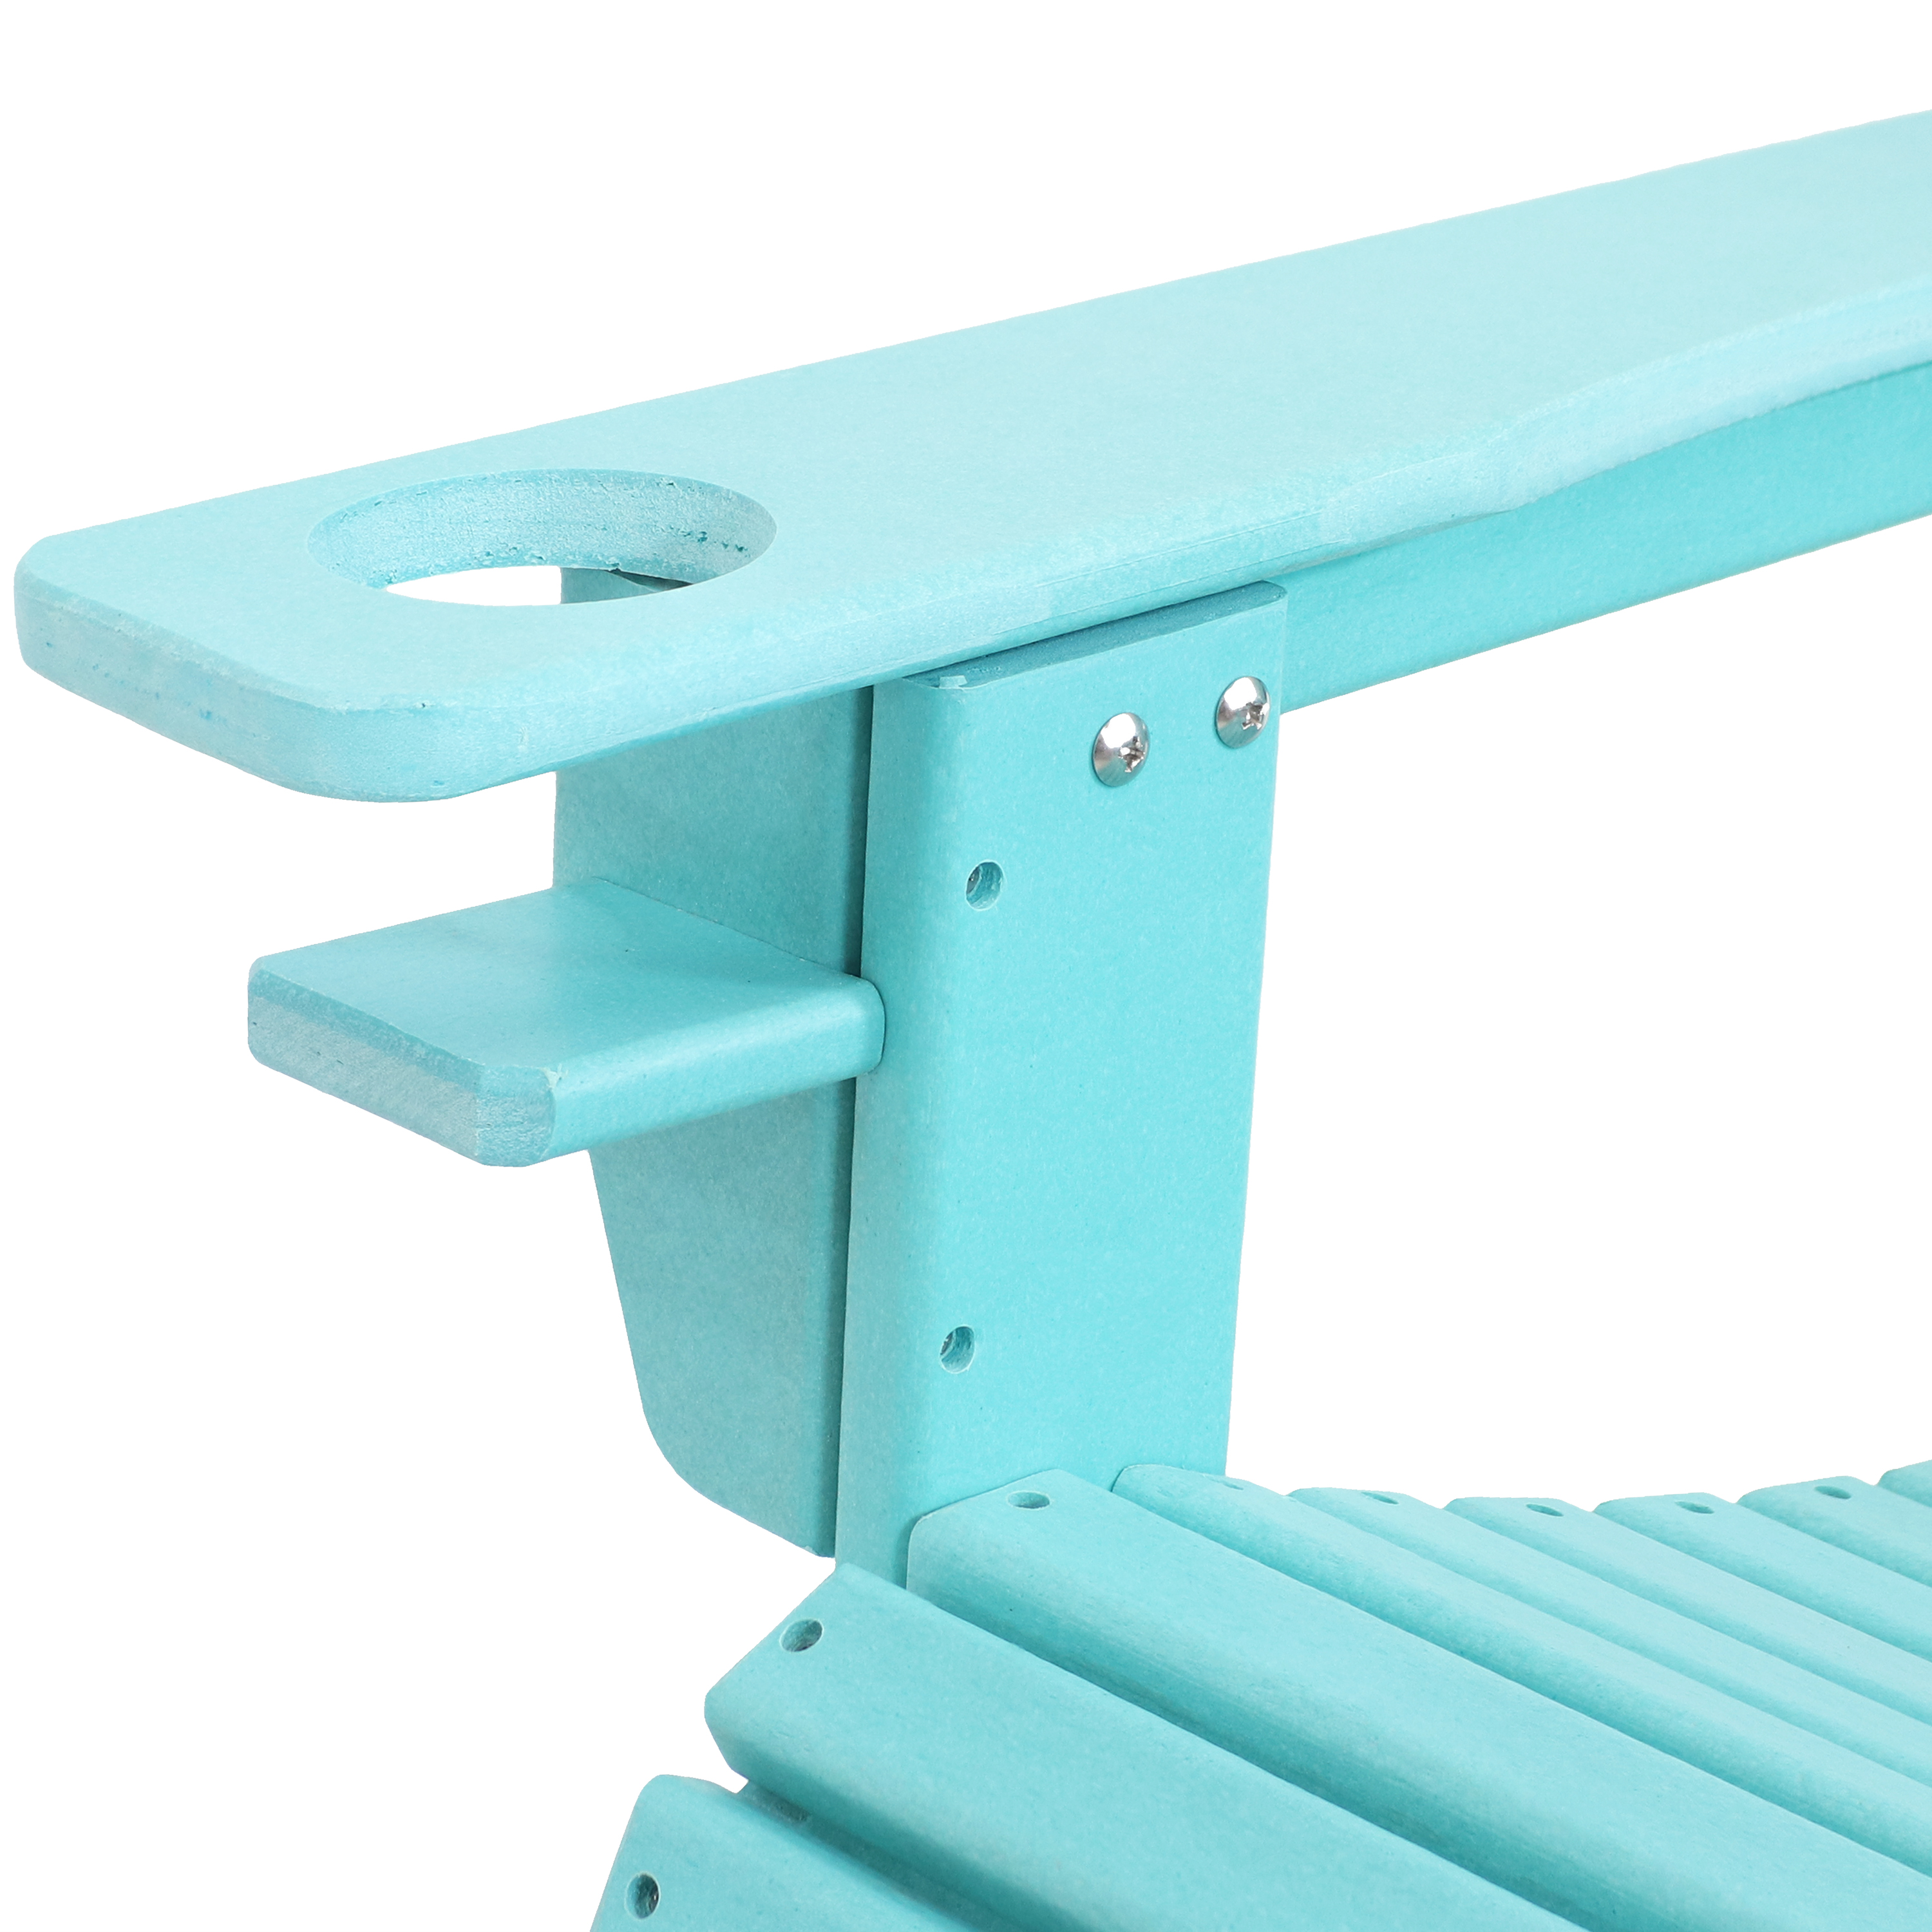 Sunnydaze All-Weather Outdoor Adirondack Chair with Drink Holder - Turquoise - Set of 2 - image 5 of 11